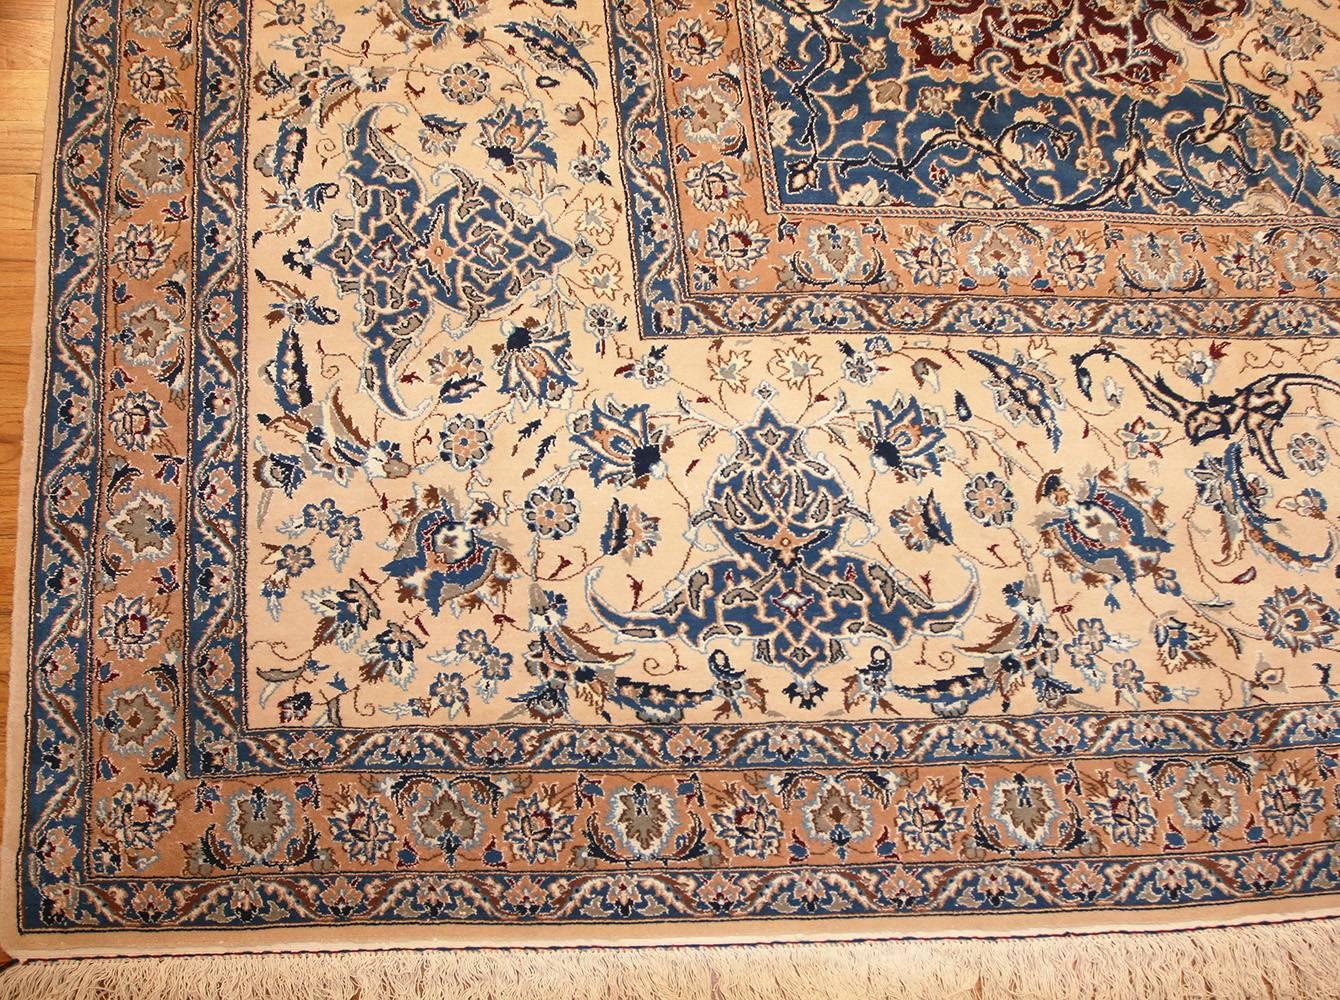 Vintage Palace Size Finely Woven Silk And Wool Persian Nain Carpet, Country of Origin / Rug Type: Vintage Persian Rugs, Circa Date: Middle Part of the 20th Century. Size: 20 ft 6 in x 35 ft (6.25 m x 10.67 m).